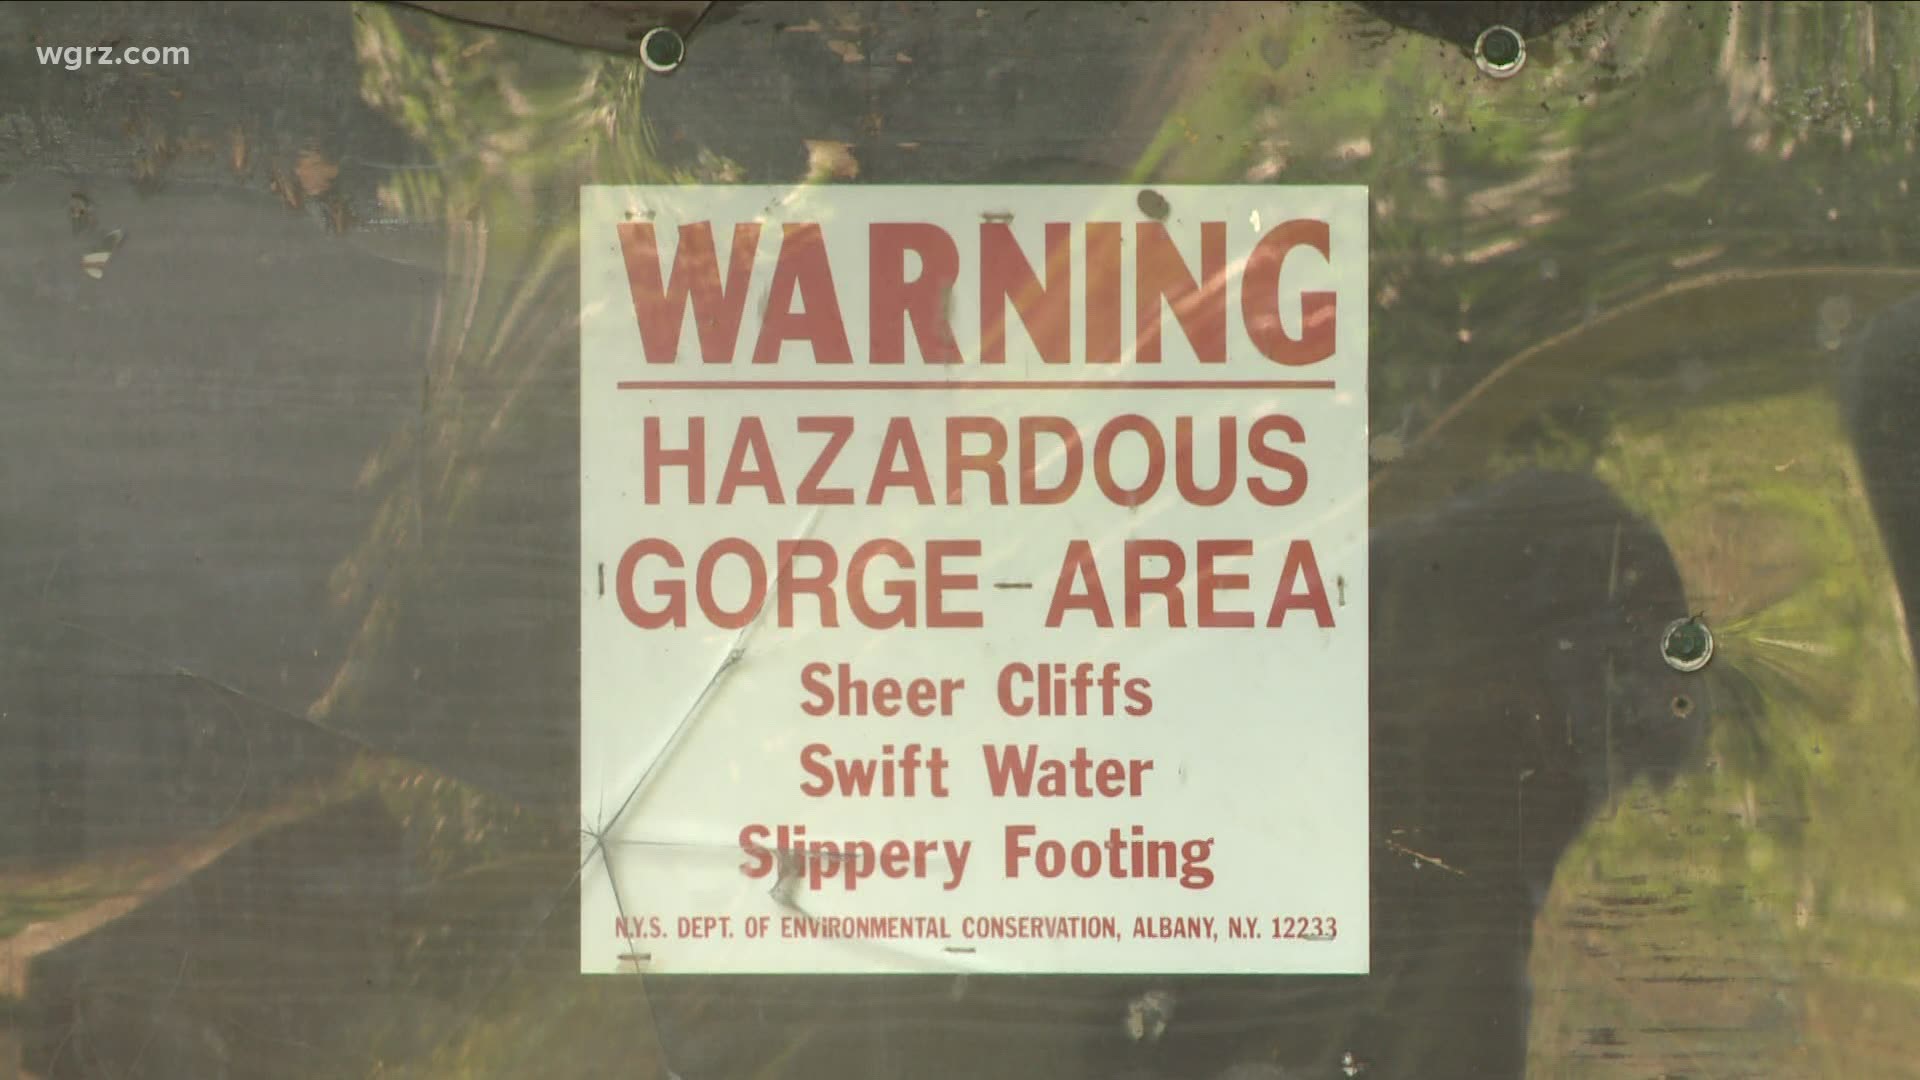 A 16-year-old girl has died after falling off a steep ledge in Zoar Valley, Saturday.  Officials warn that the park is extremely dangerous, despite its beauty.